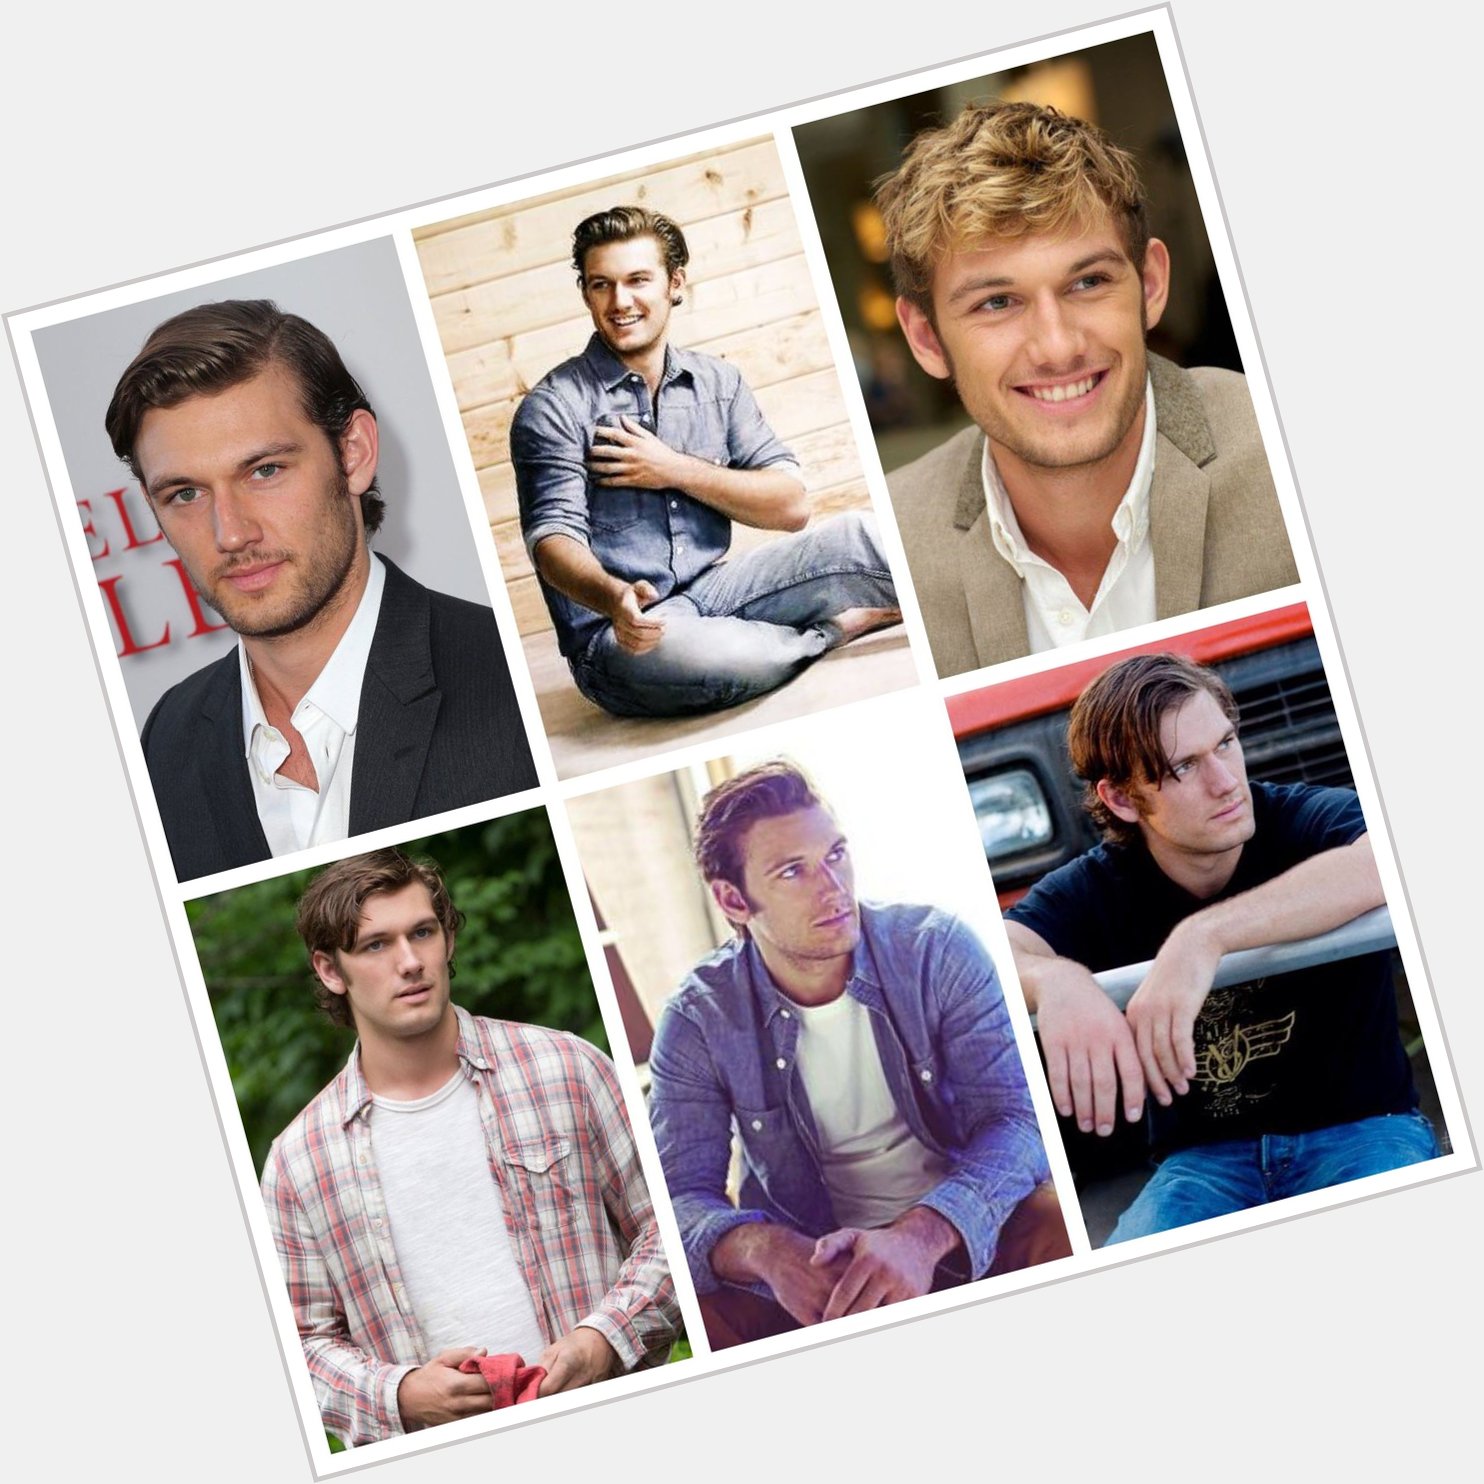 Happy Birthday English actor Alex Pettyfer, now 32 years old. 